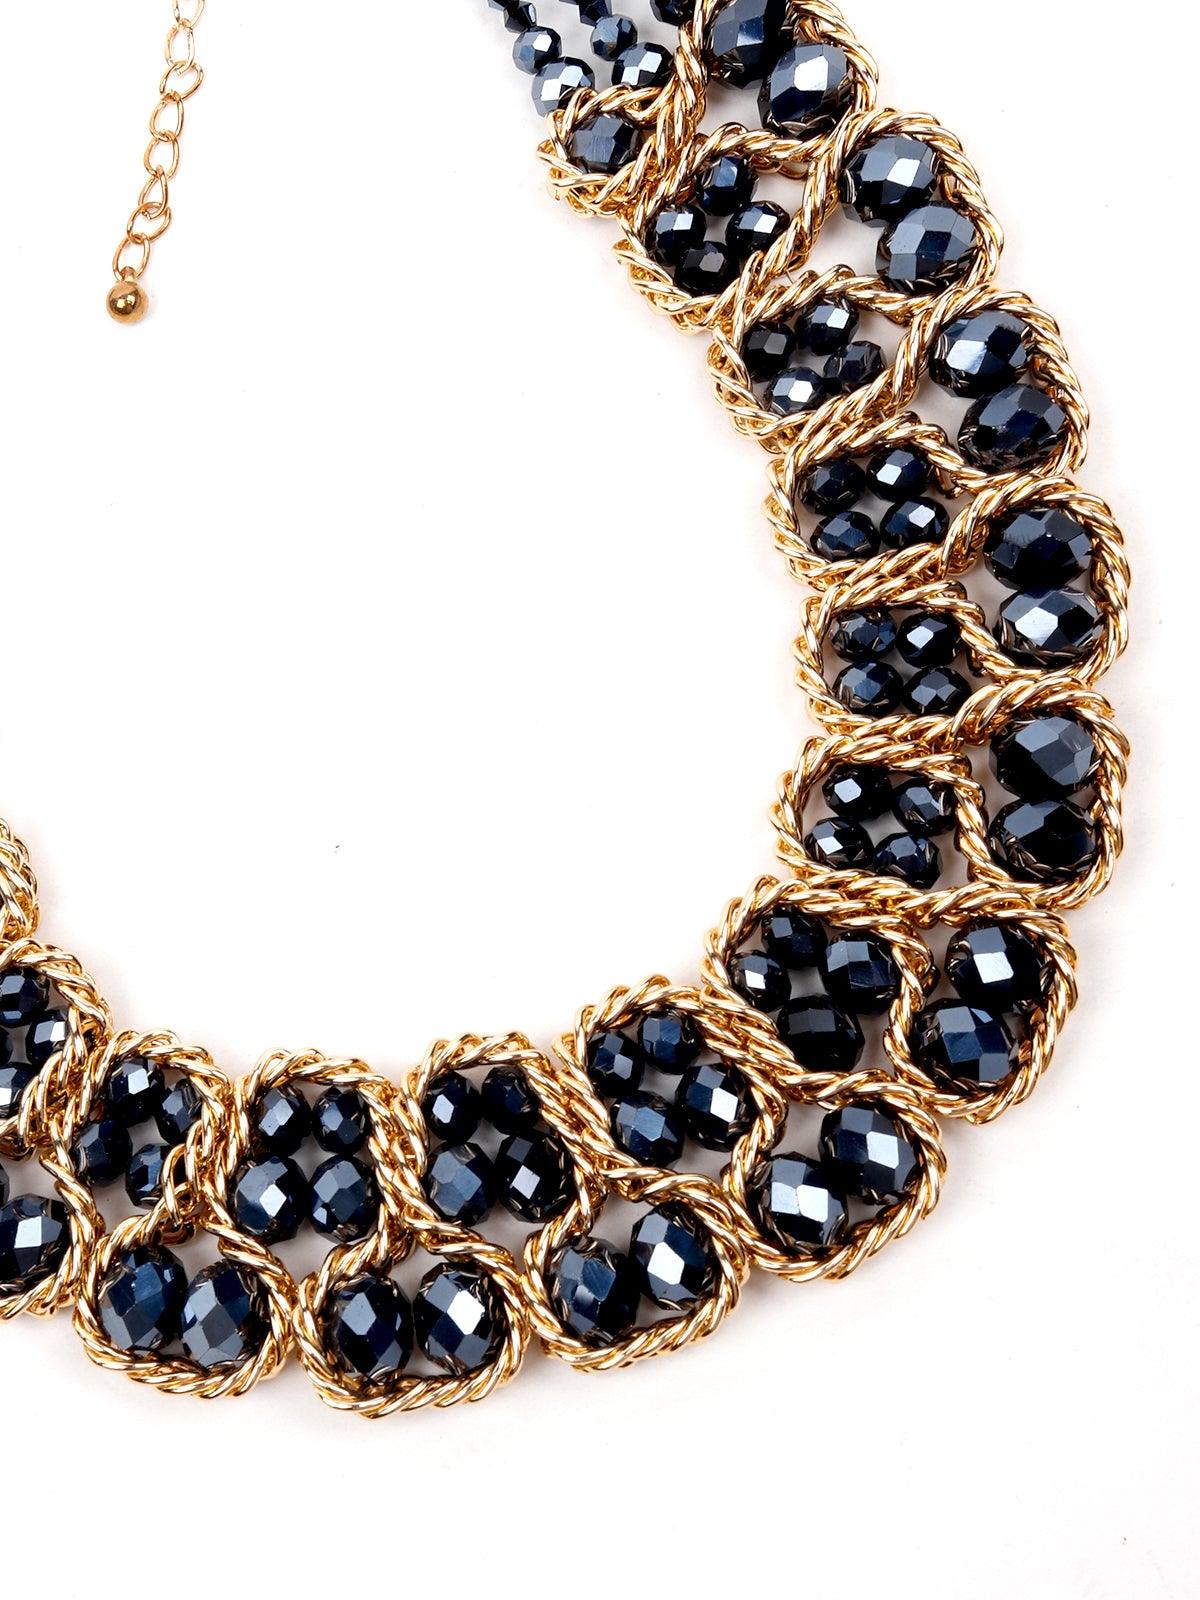 Double Layered Black Beaded Necklace - Odette